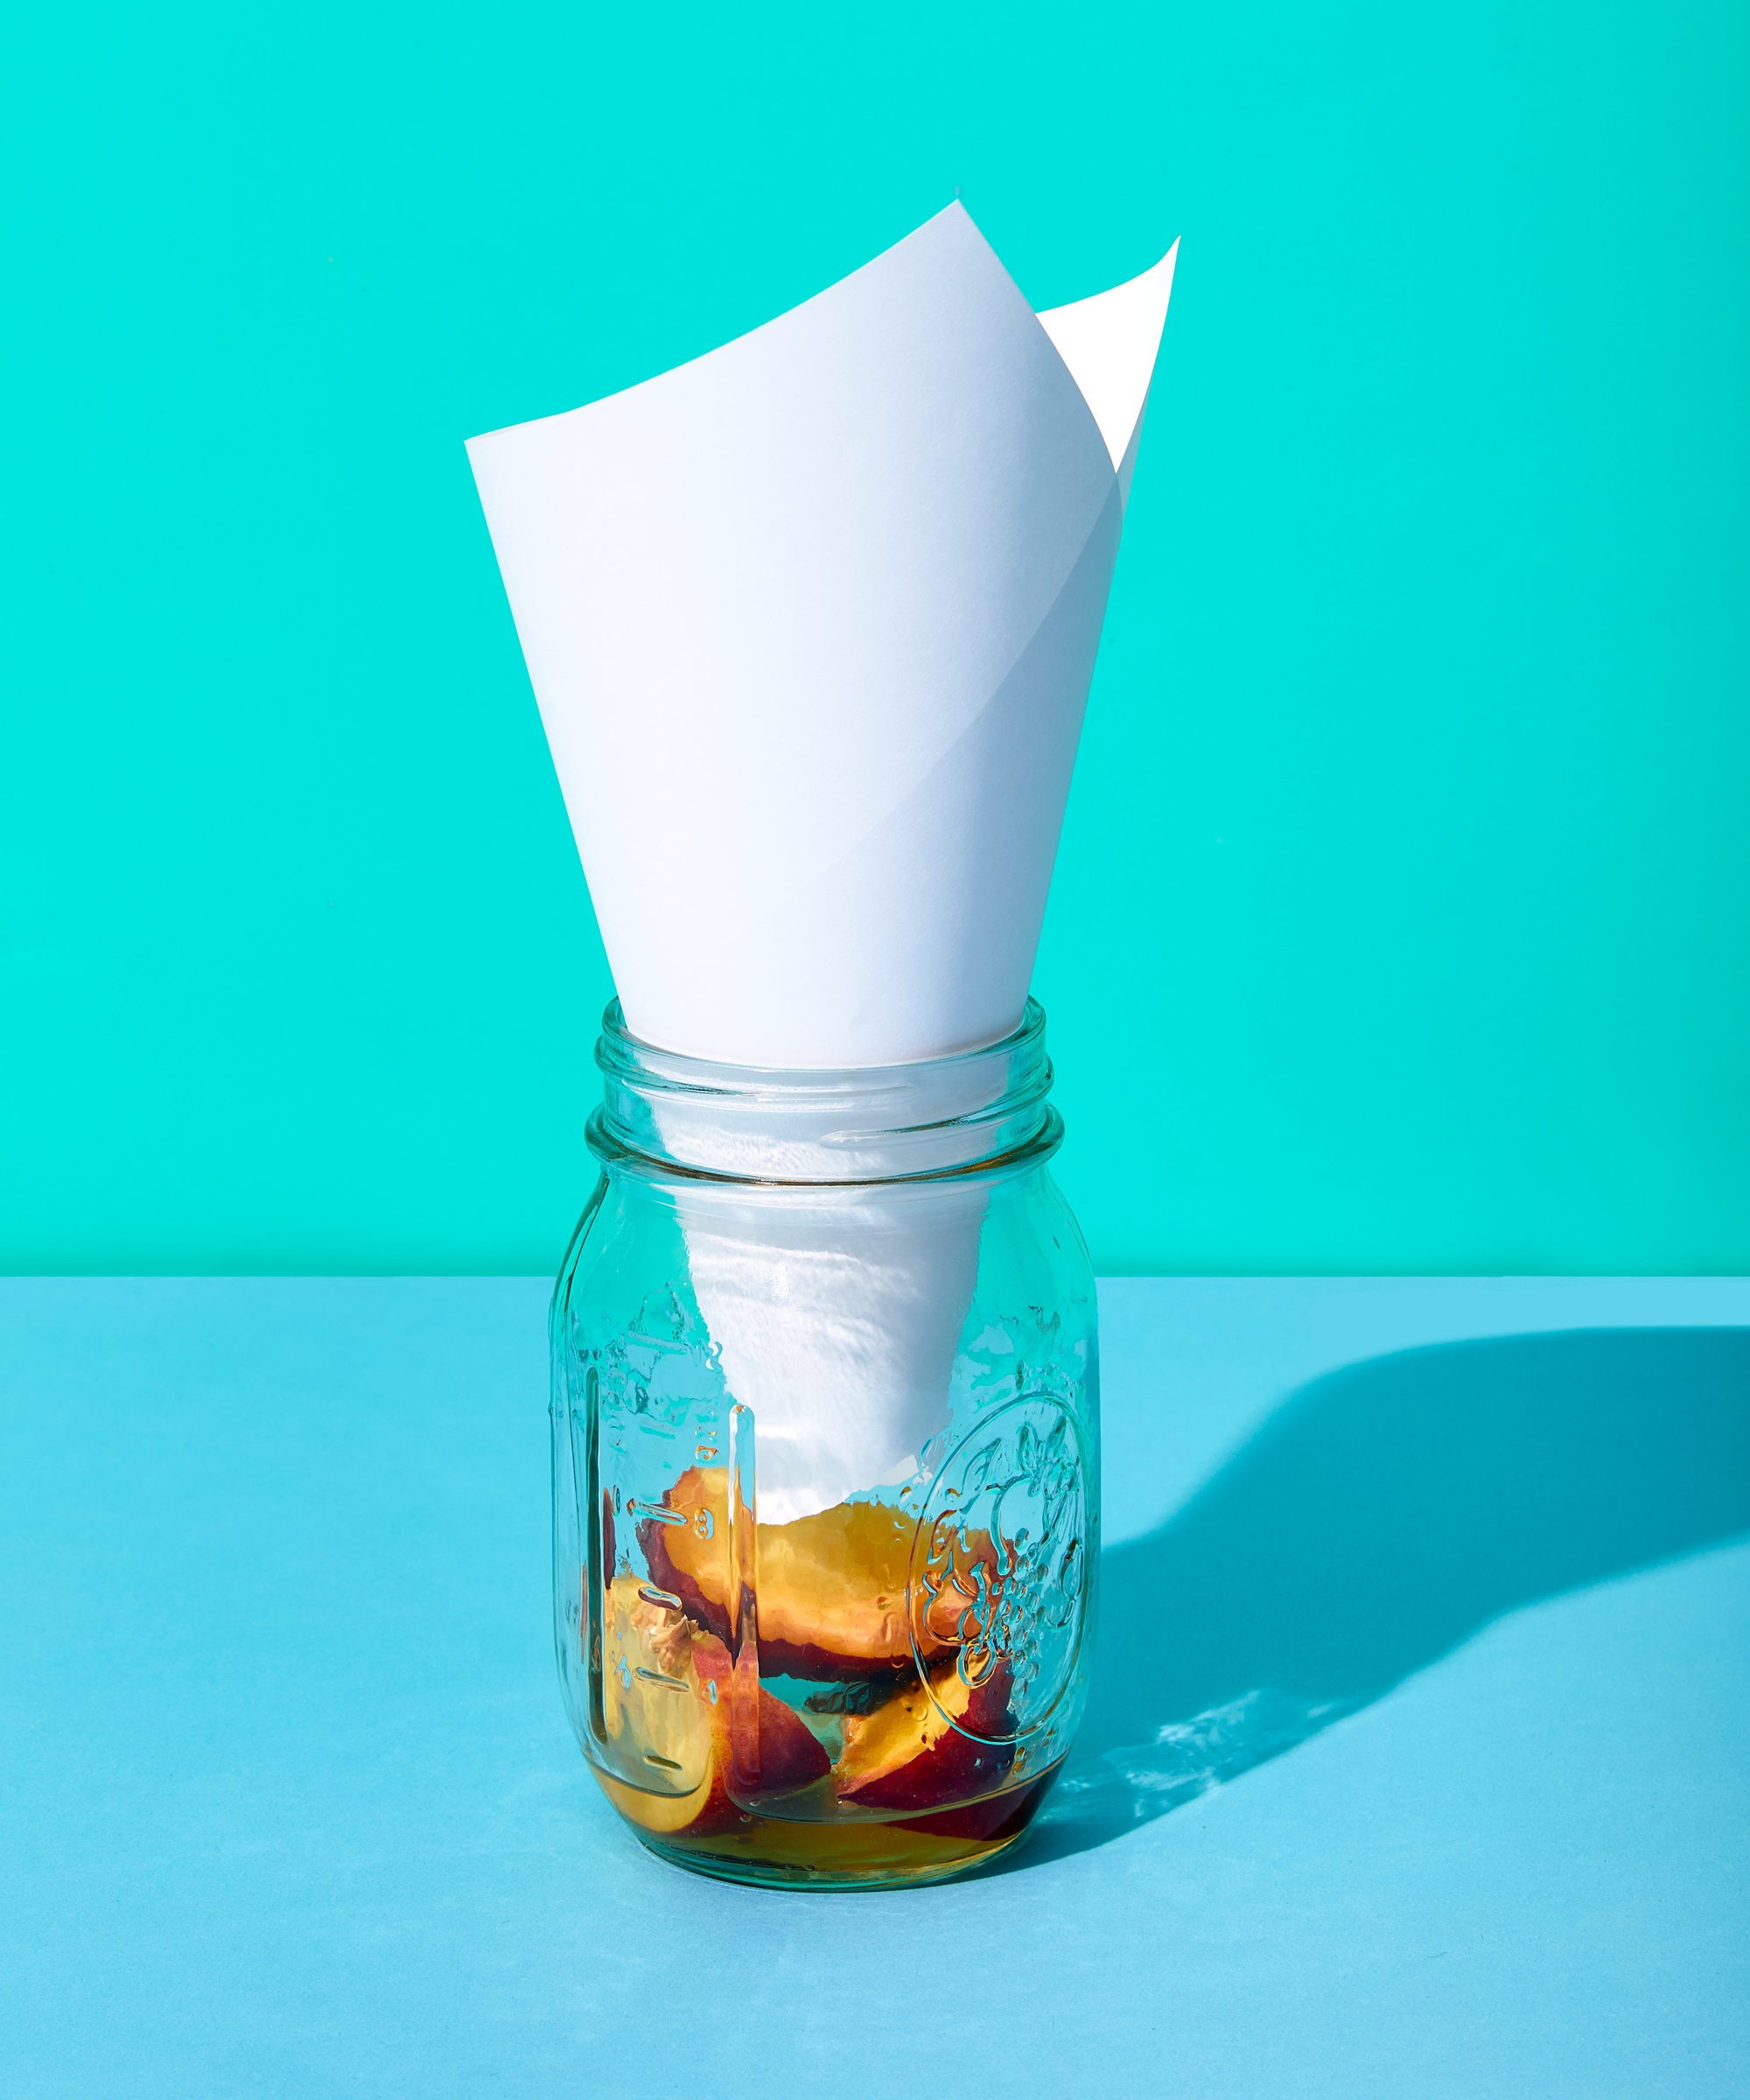 How to Get Rid of Fruit Flies (THE BEST Homemade Fruit Fly Trap